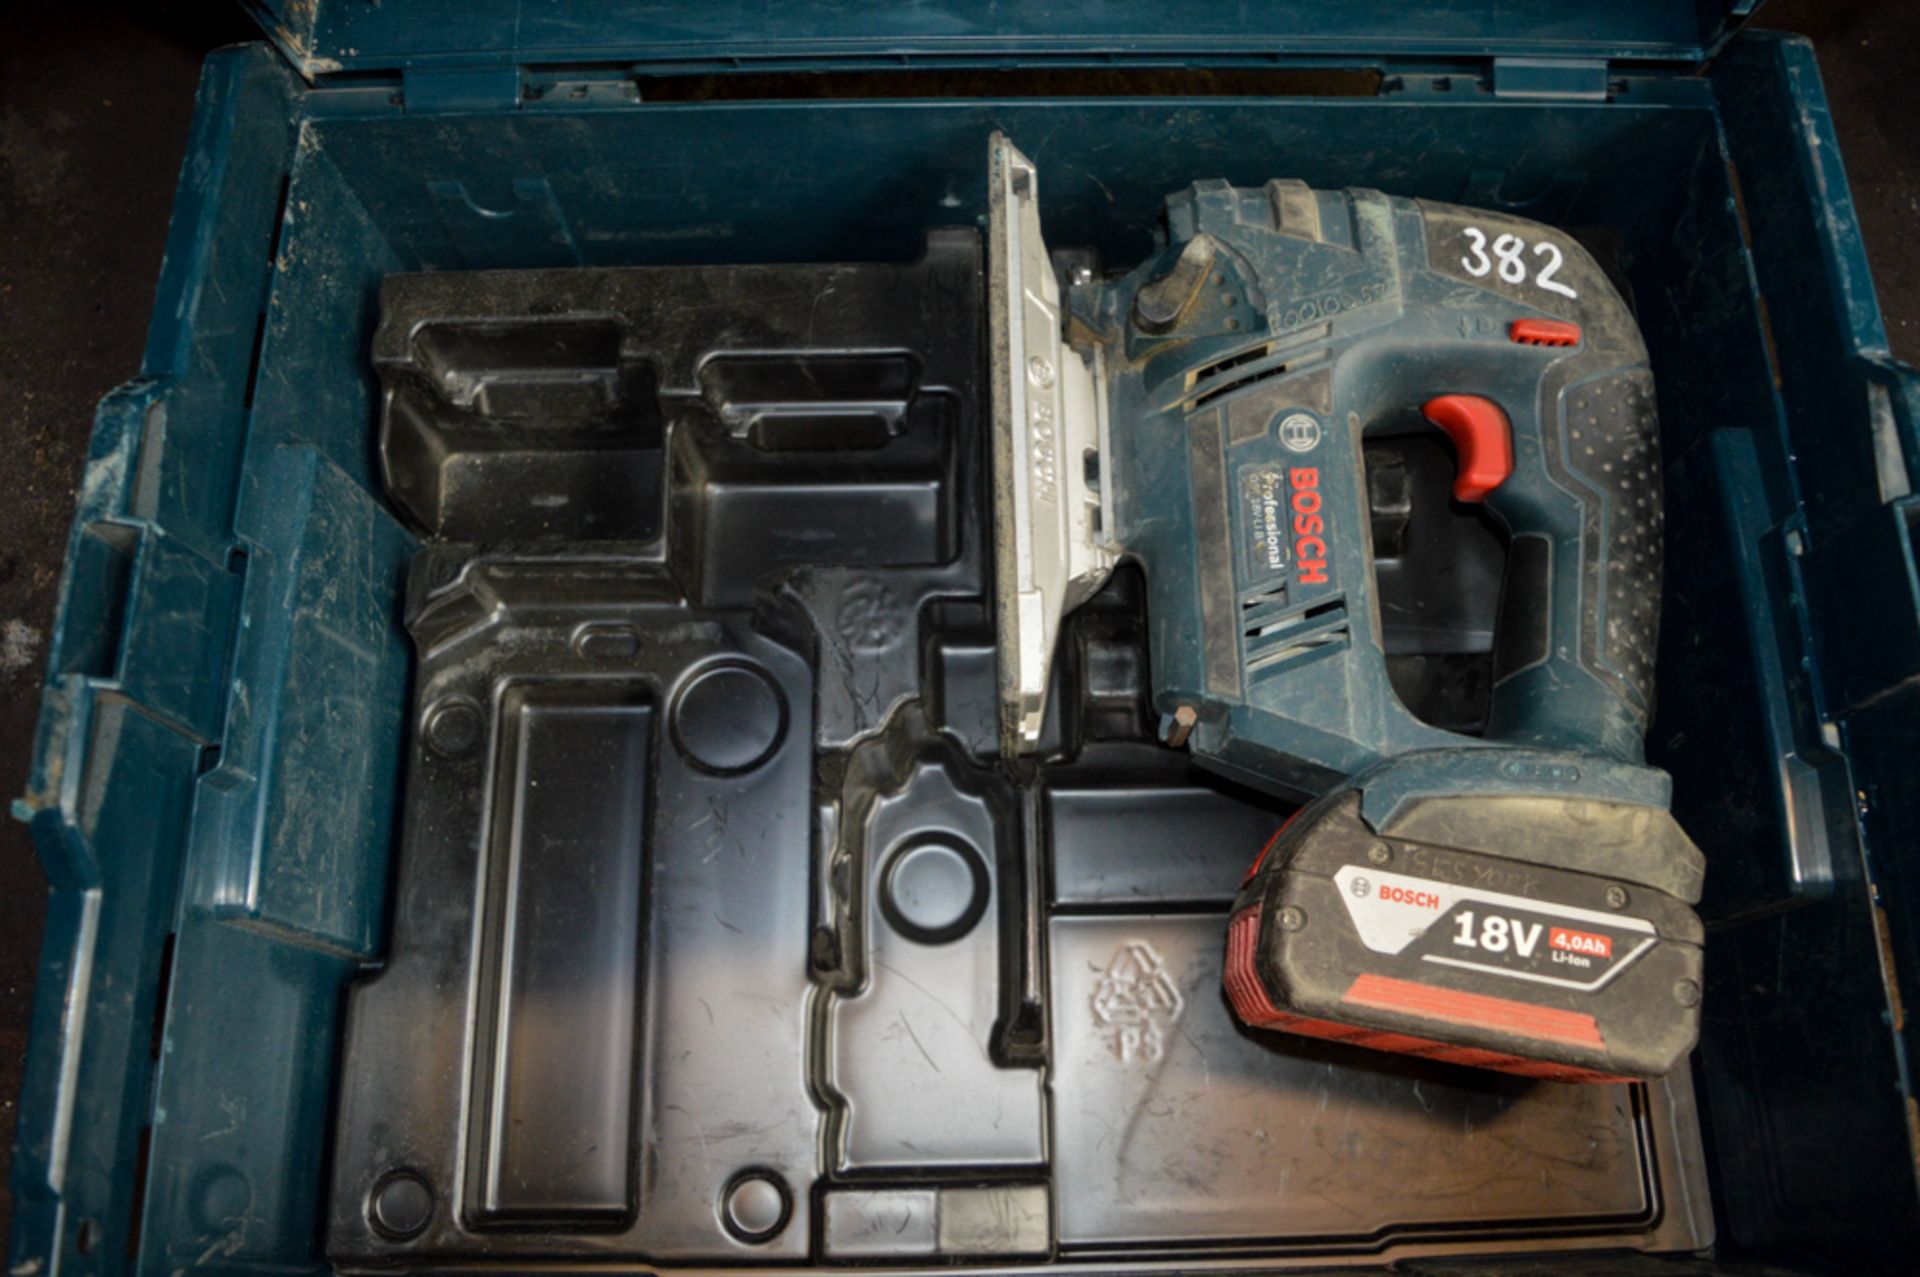 Bosch 110v jigsaw c/w battery & carry case **No charger**